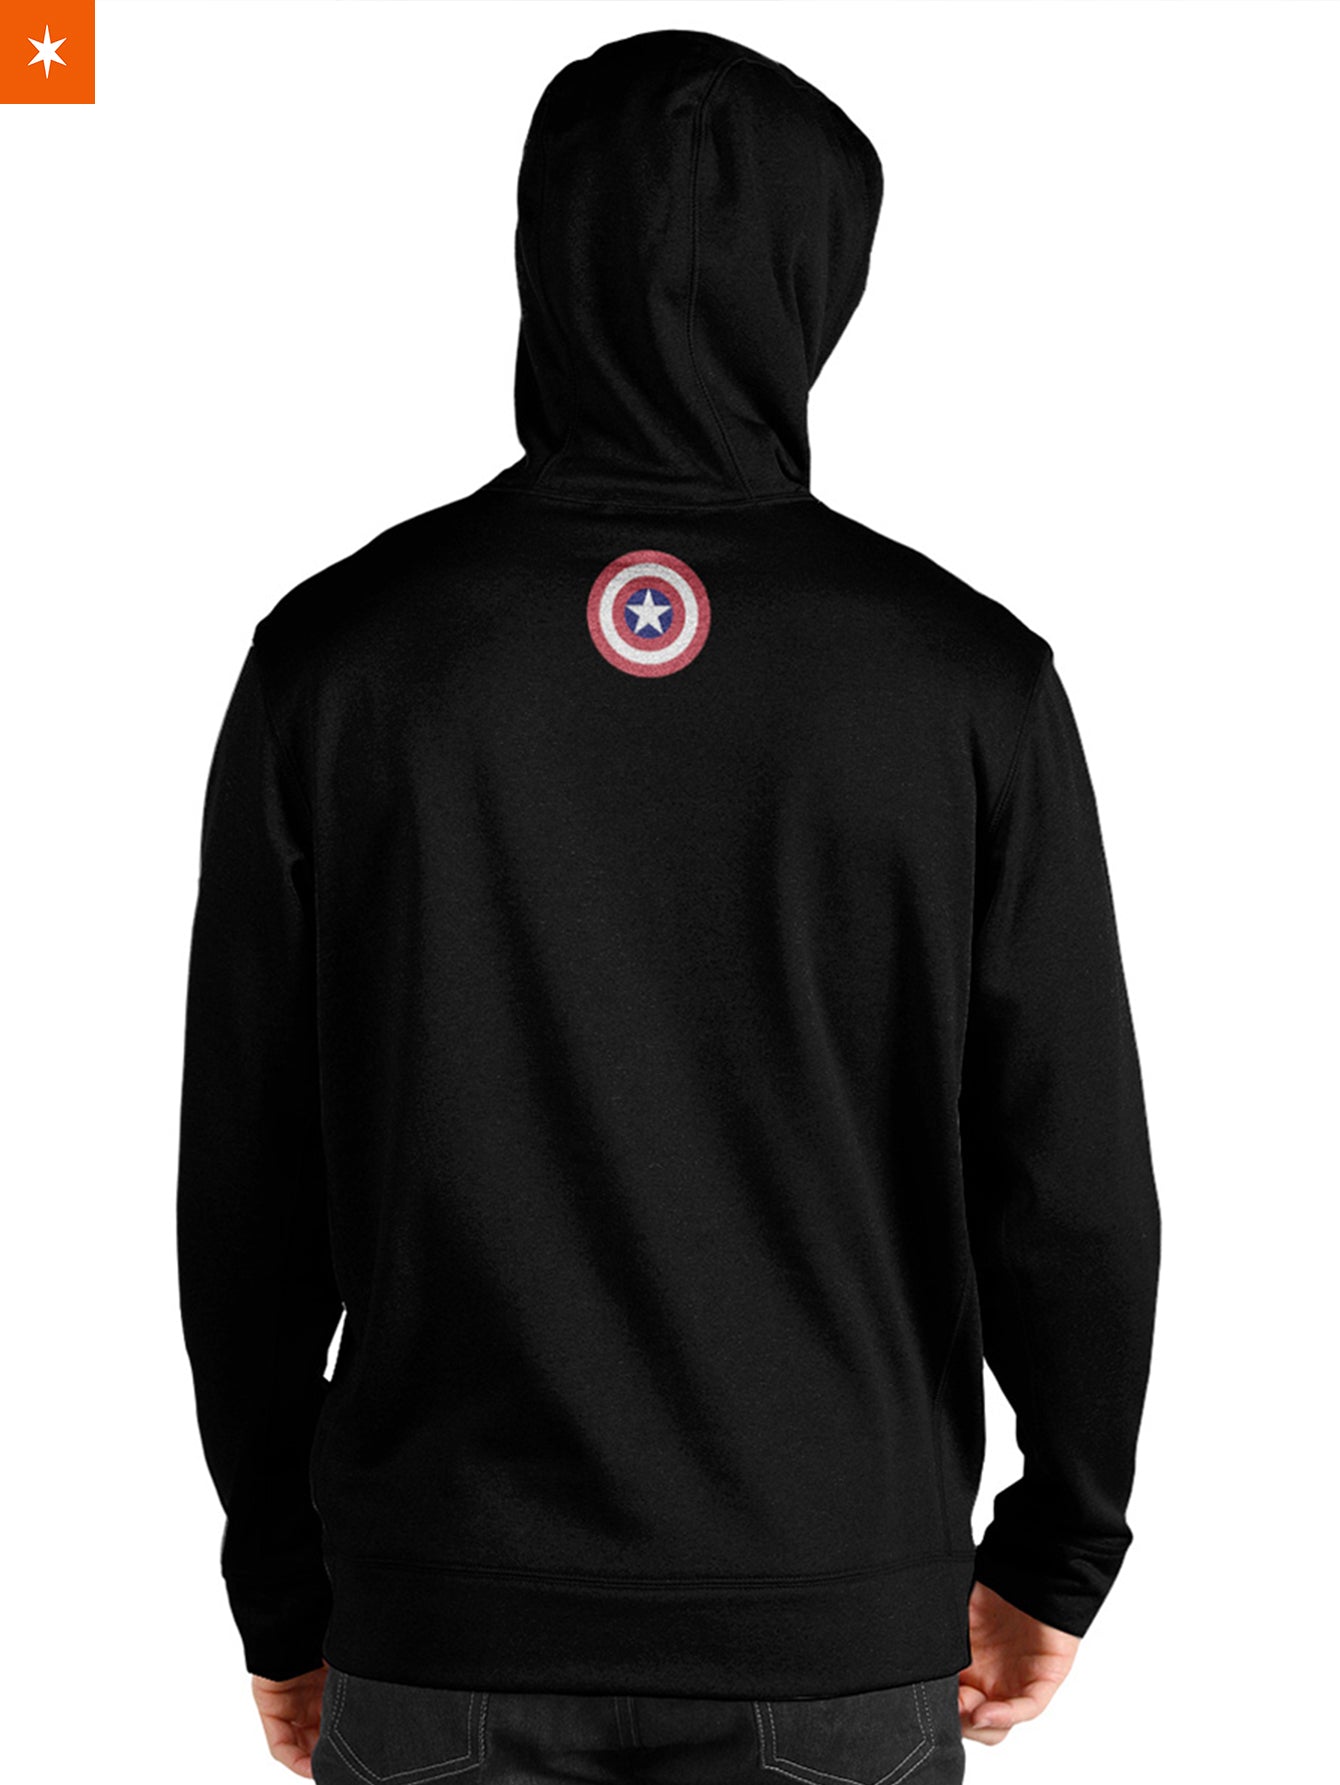 Fandomaniax - End of the Line Unisex Pullover Hoodie